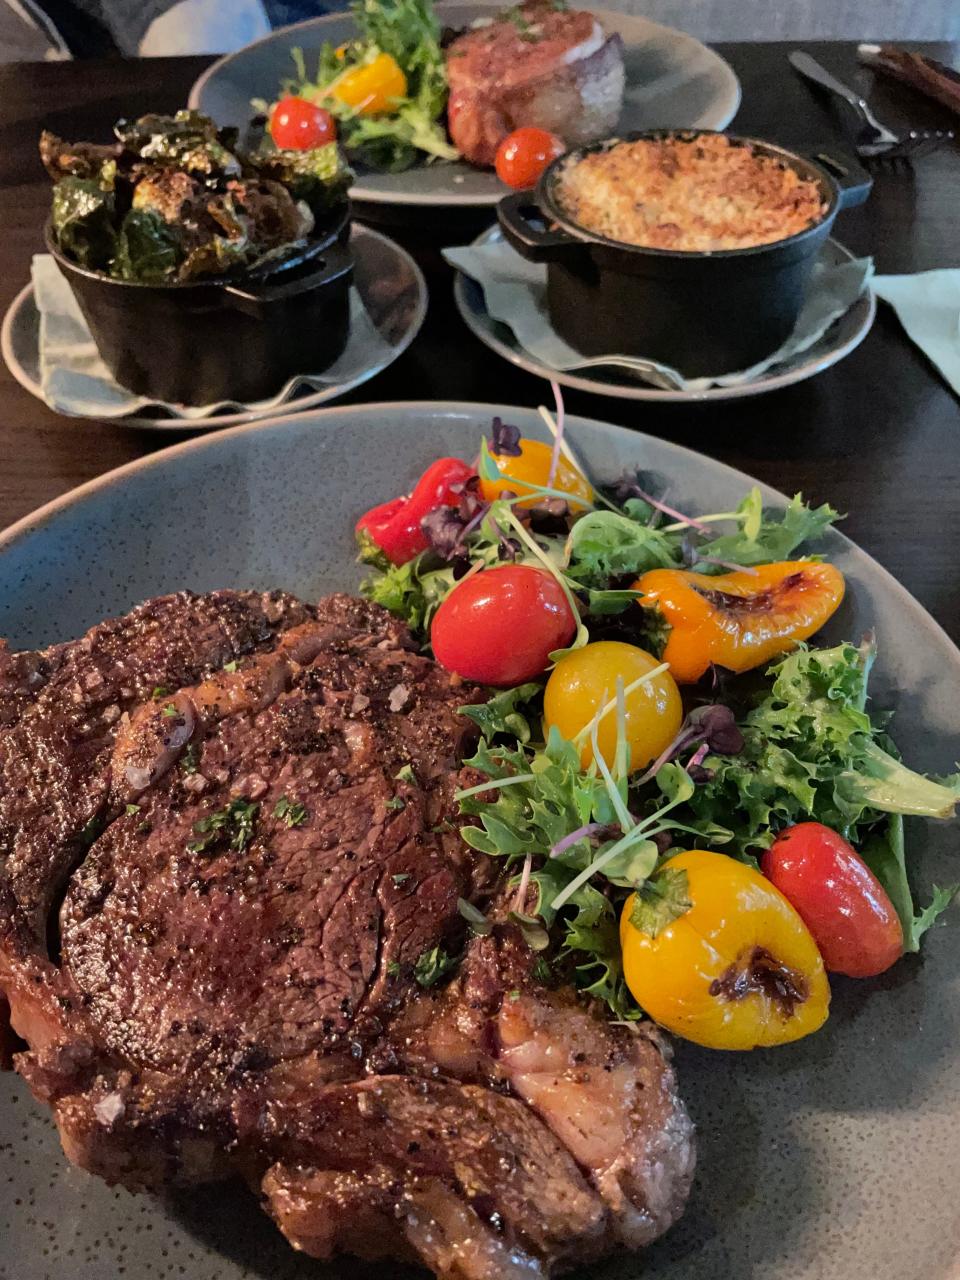 The 16-ounce ribeye at Fire + Smoke on Northshore Drive is plated with warm greens topped with different varieties of tomatoes and peppers.